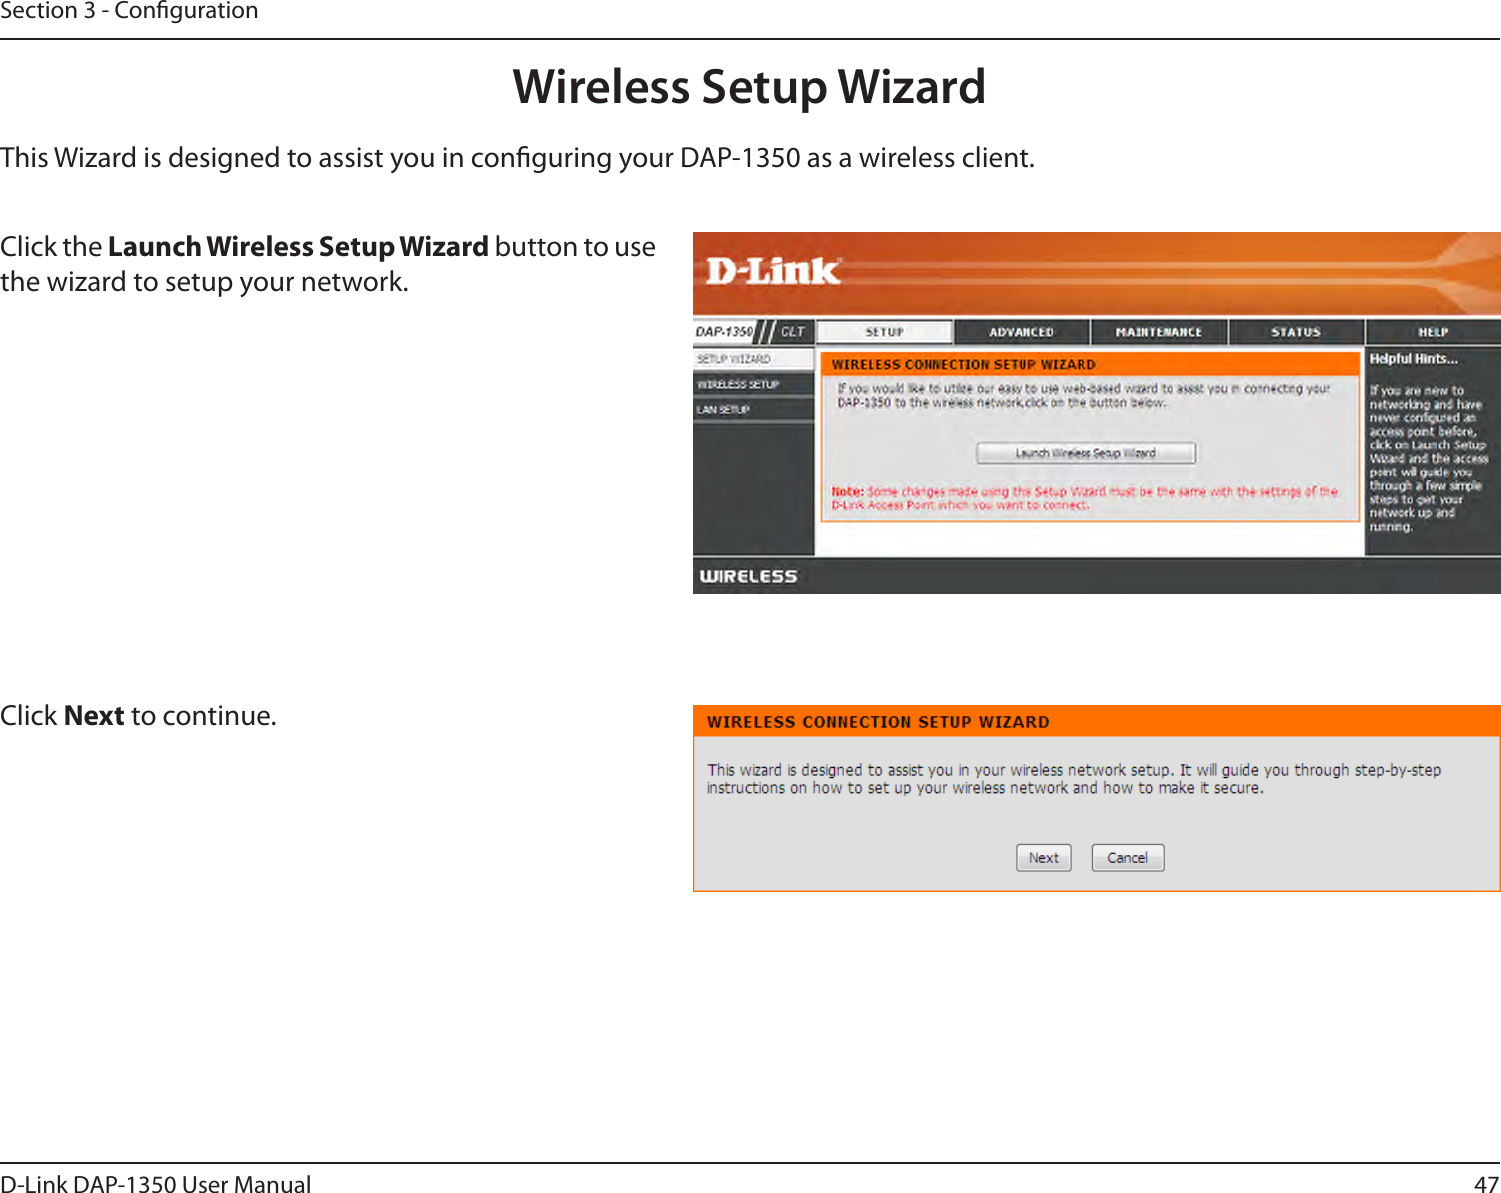 47D-Link DAP-1350 User ManualSection 3 - CongurationThis Wizard is designed to assist you in conguring your DAP-1350 as a wireless client.Wireless Setup WizardClick Next to continue.Click the Launch Wireless Setup Wizard button to use the wizard to setup your network. 